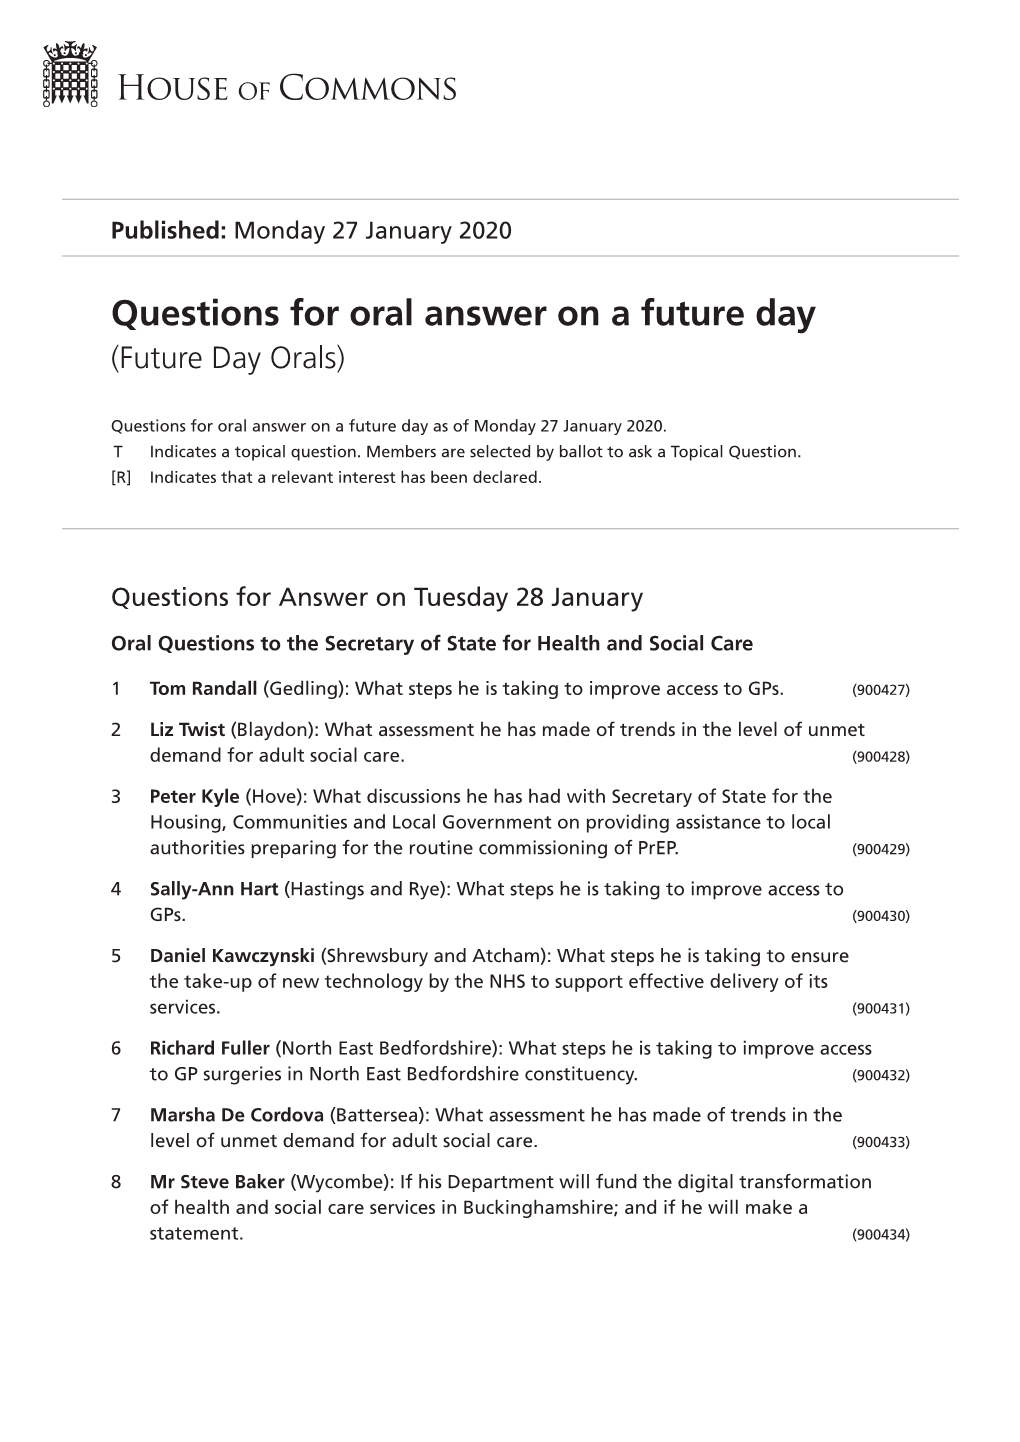 Future Oral Questions As of Mon 27 Jan 2020